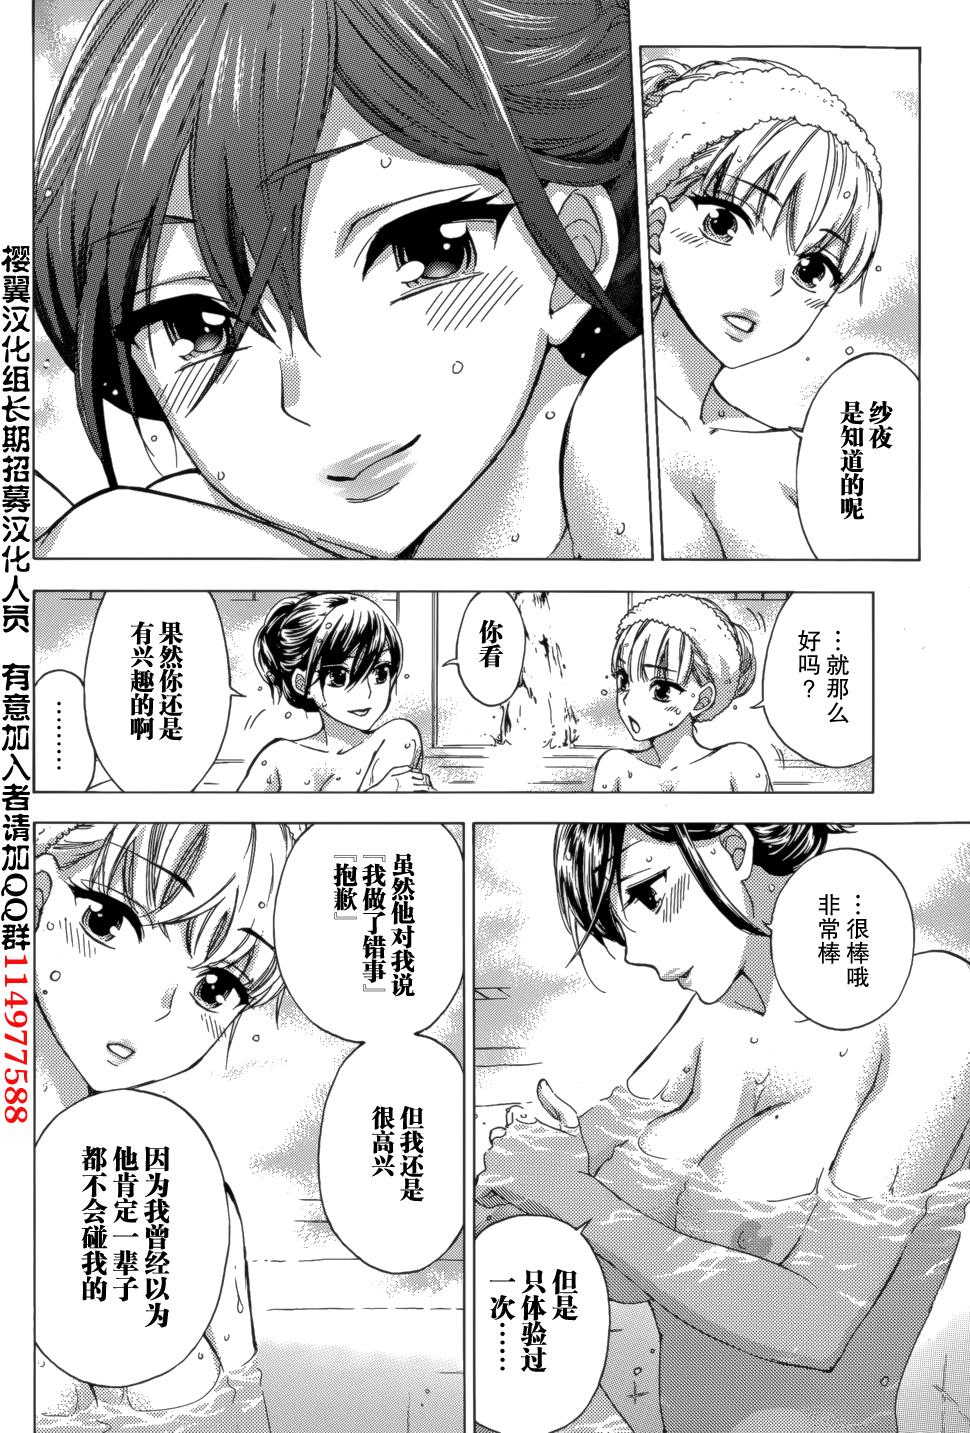 Soapy HUNDRED GAME Ch. 6 Moaning - Page 2